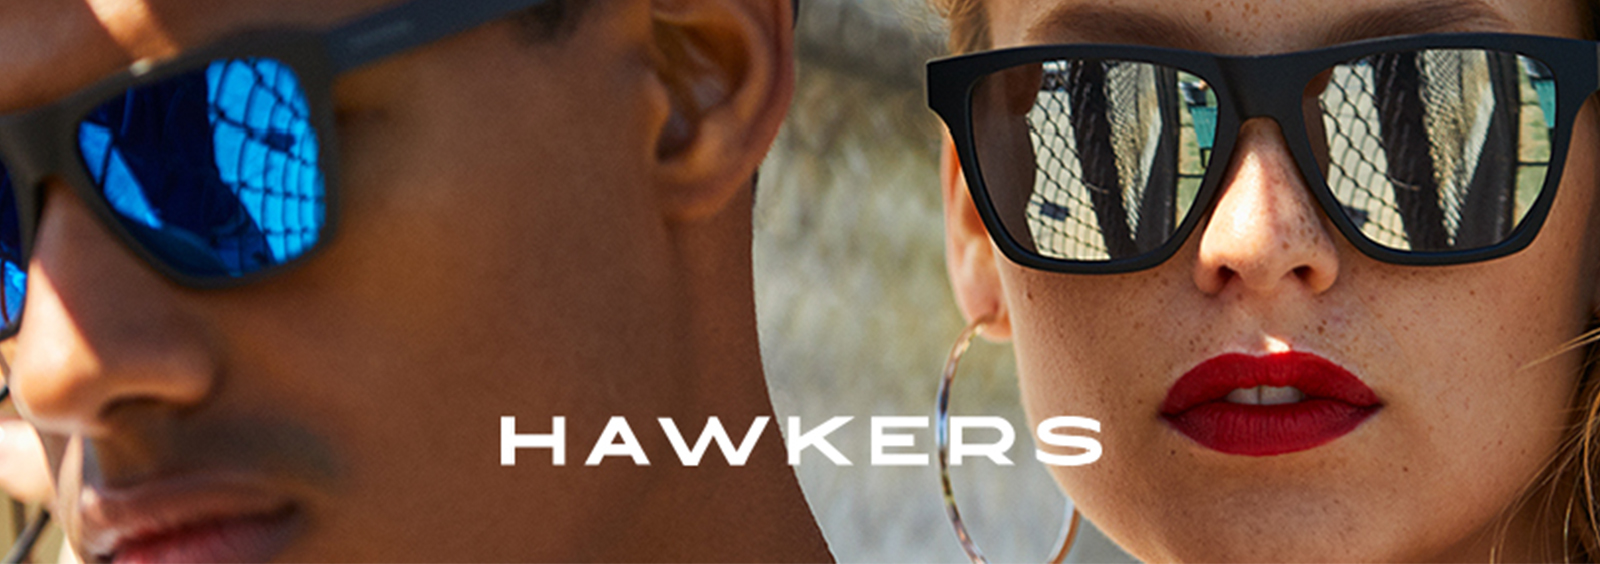 Hawkers - Hawkers